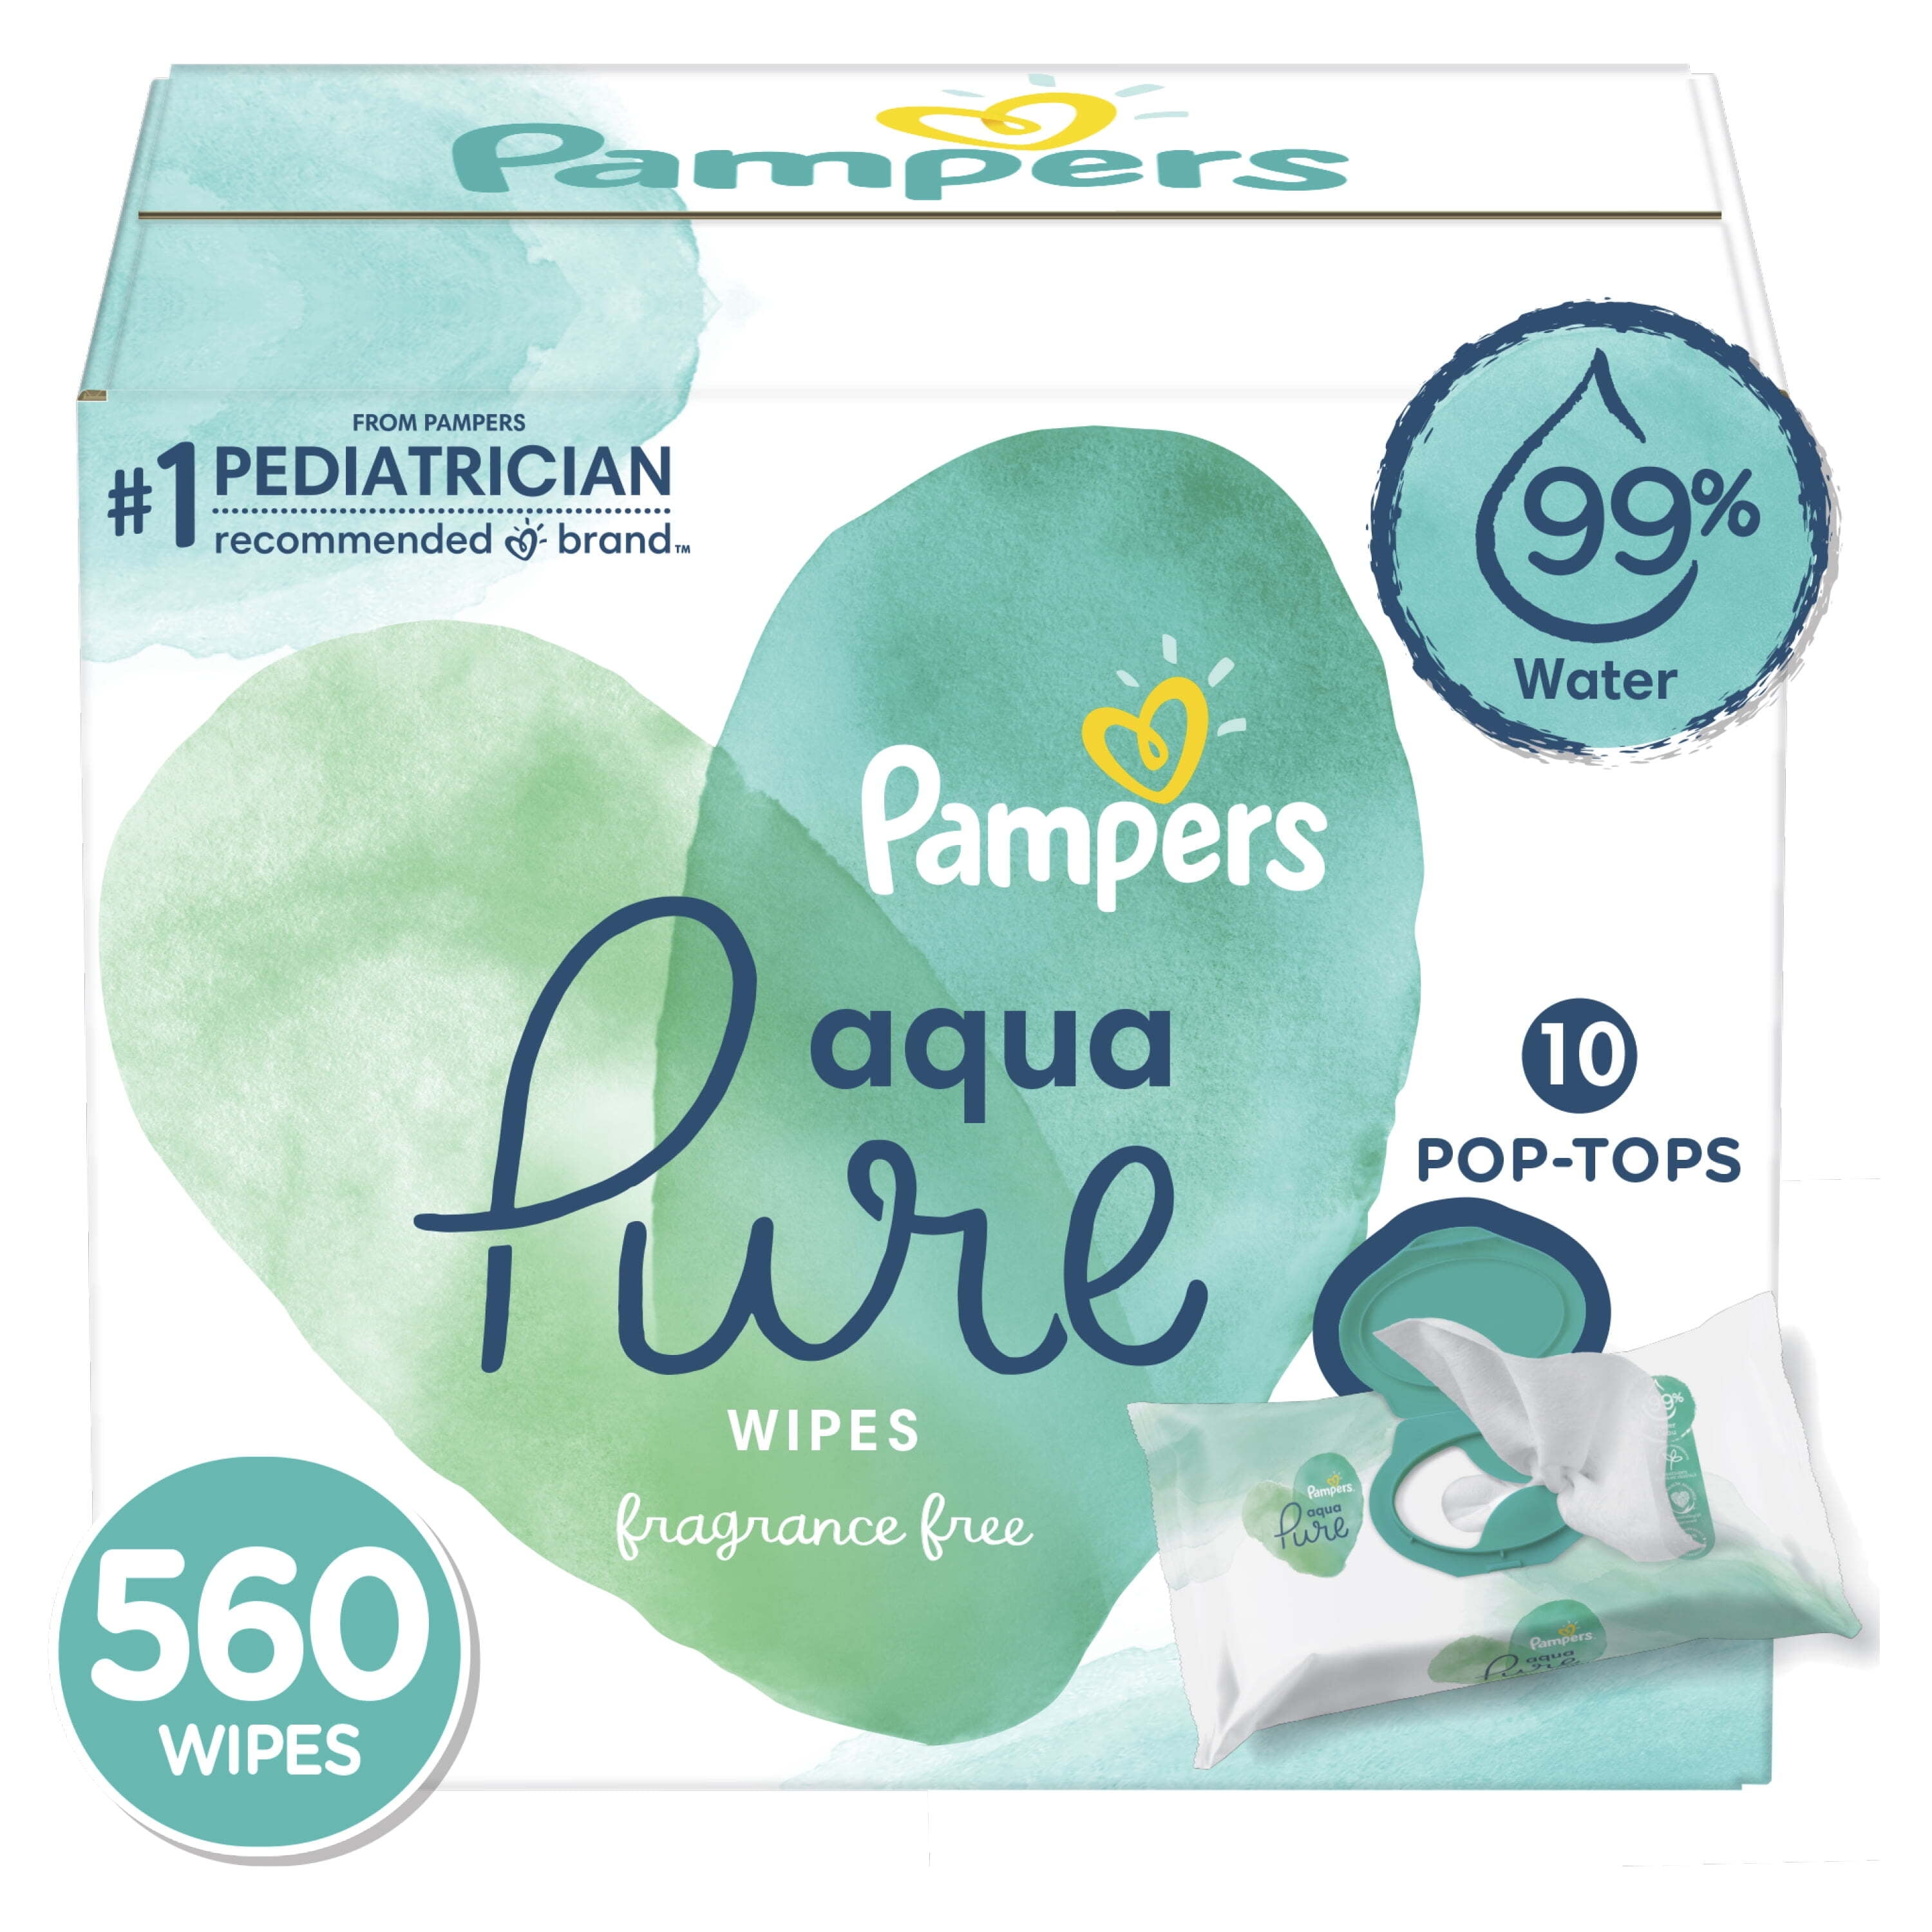 Dodot Aqua Pure Baby Wipes, 99% Water, 864 Wipes, 18 Packs (14+4 Free) :  Buy Online at Best Price in KSA - Souq is now : Baby Products